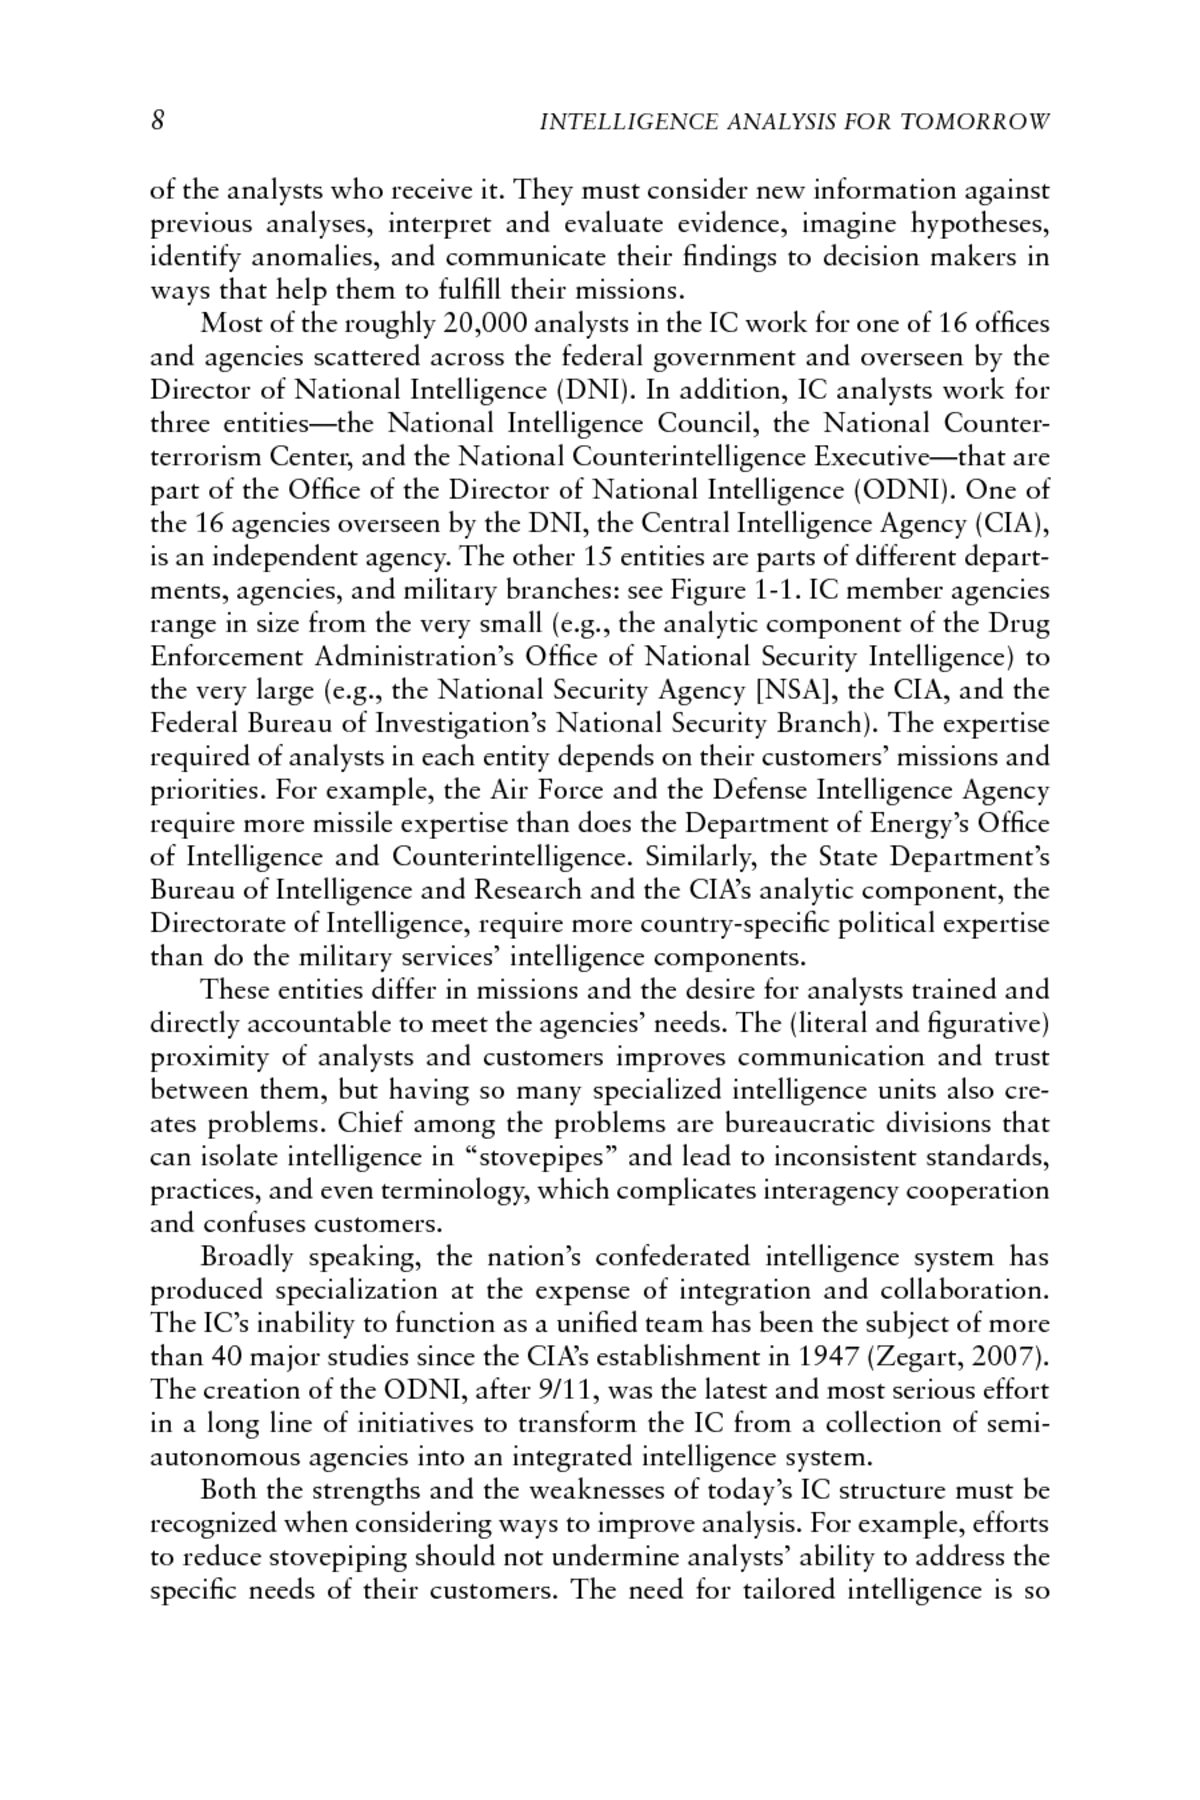 1 Challenges for the Intelligence Community | Intelligence Analysis for ...